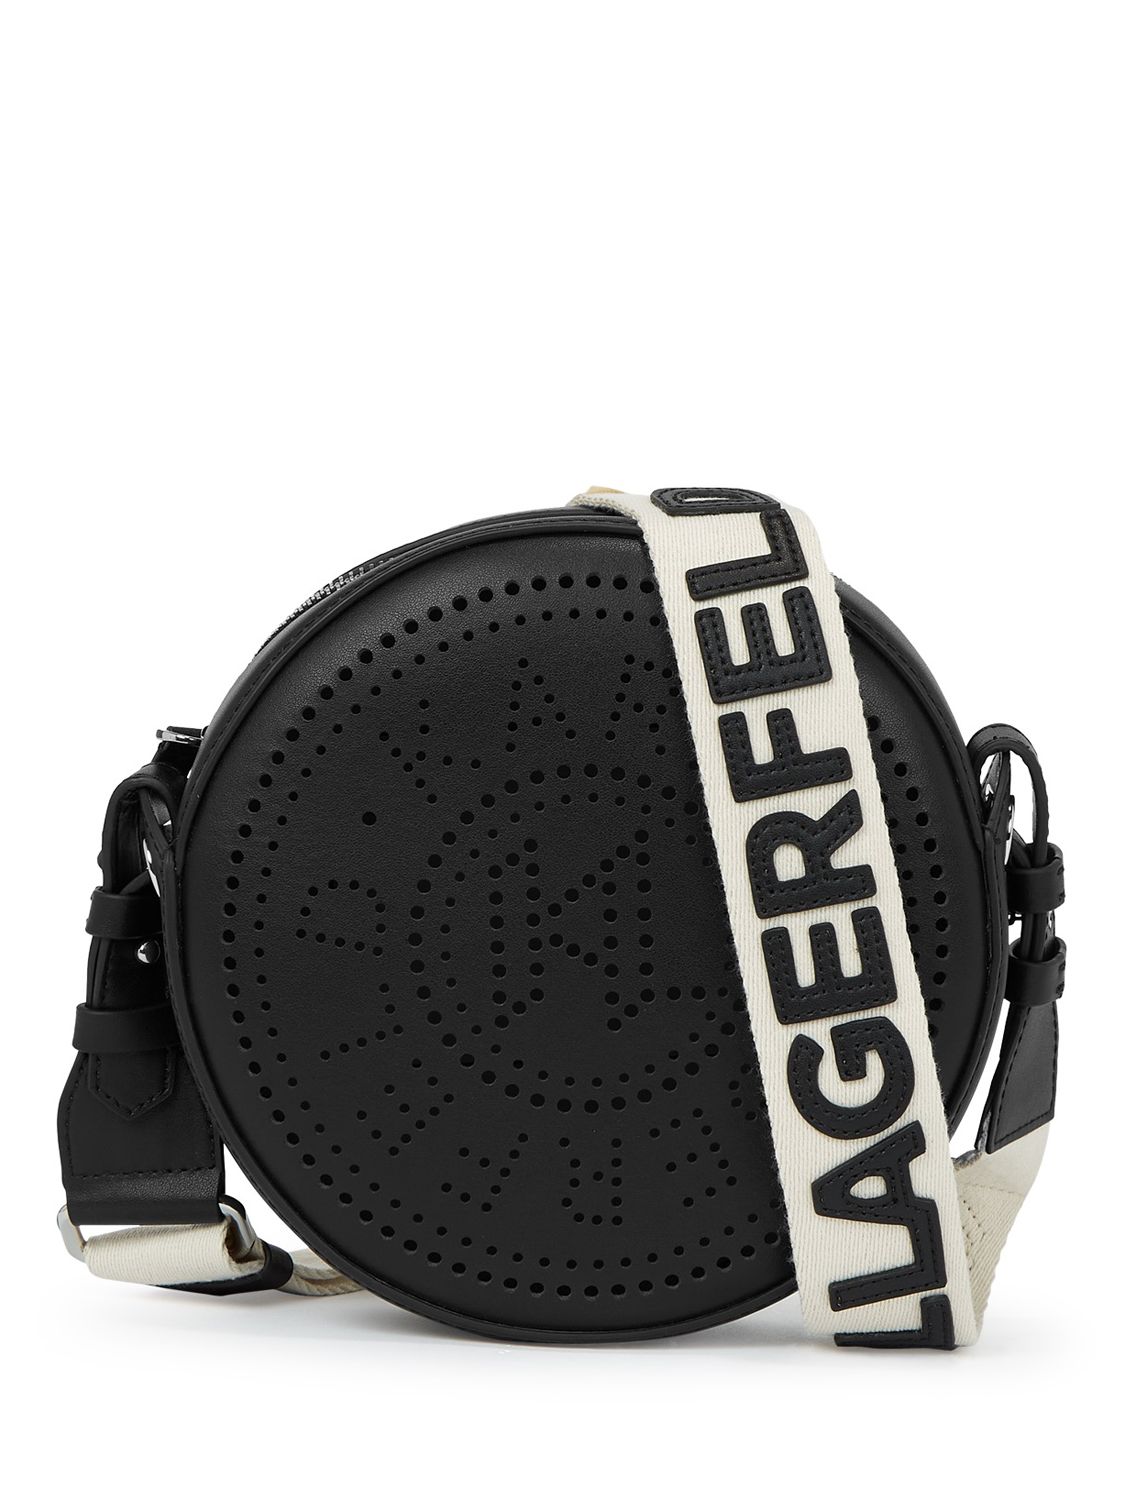 KARL LAGERFELD Large Circle Perforated Leather Cross Body Bag, Black at ...